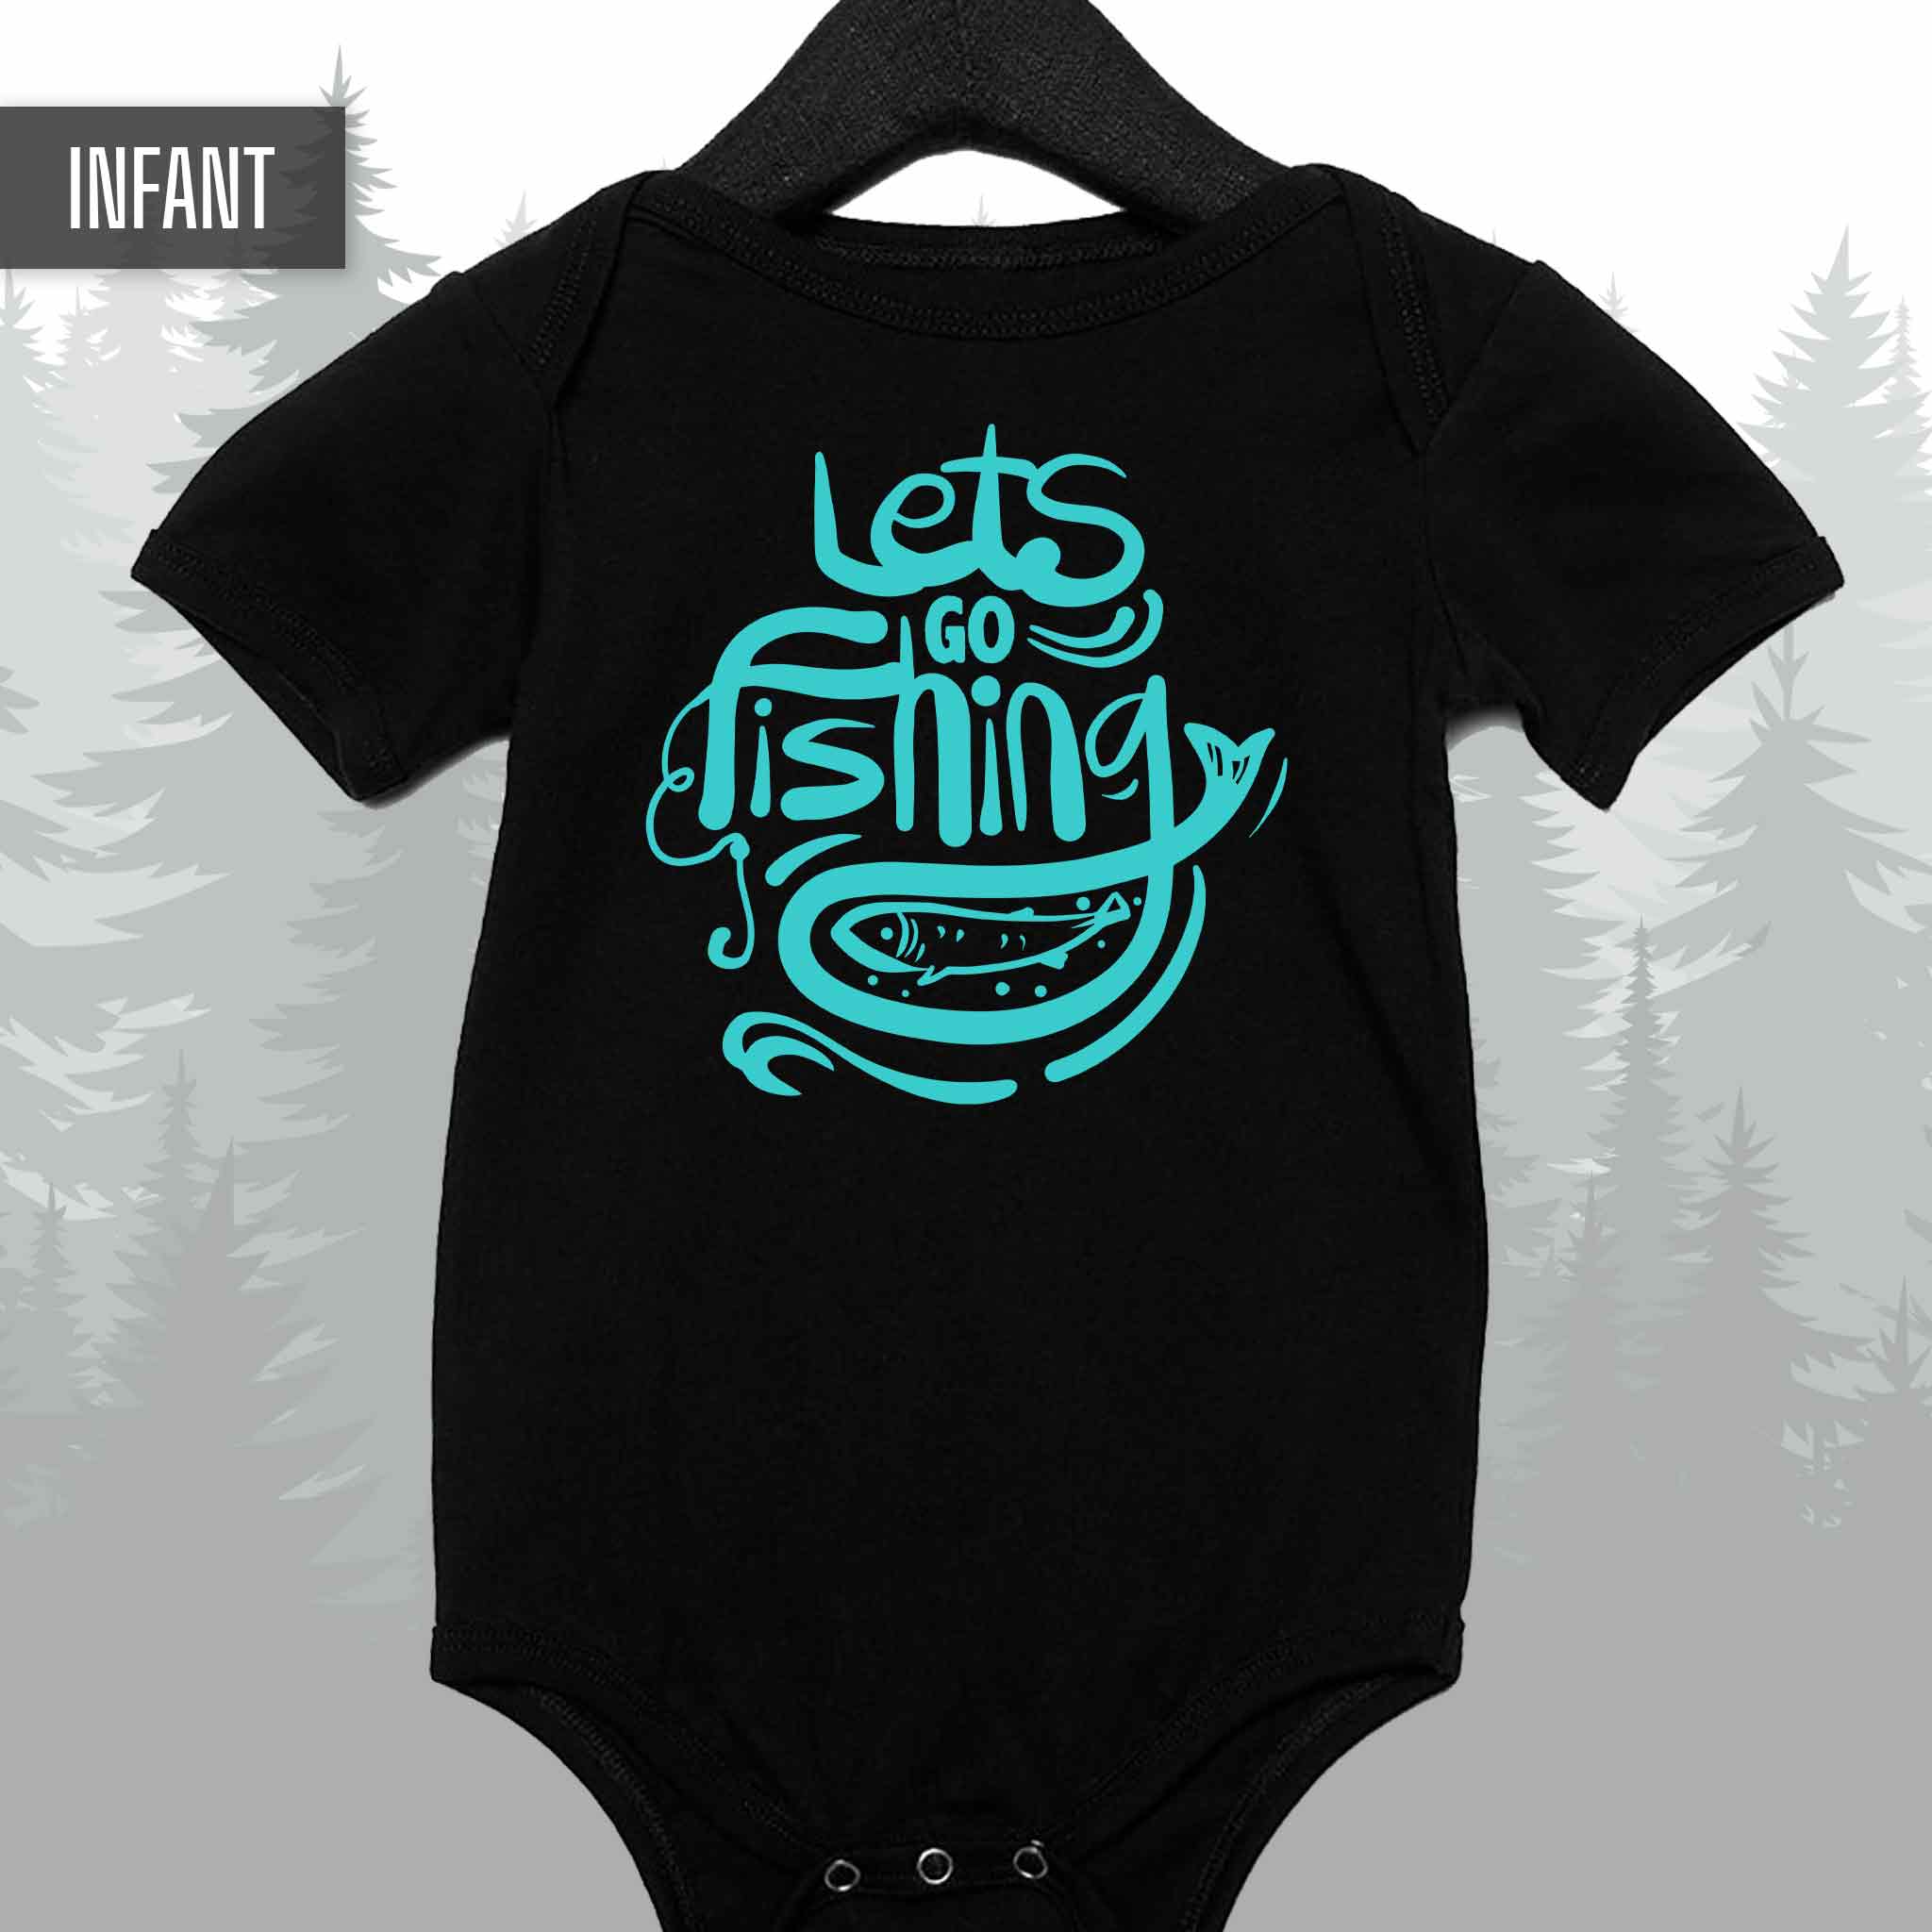 Let's Go Fishing Infant Onesie – Discover the Outdoors